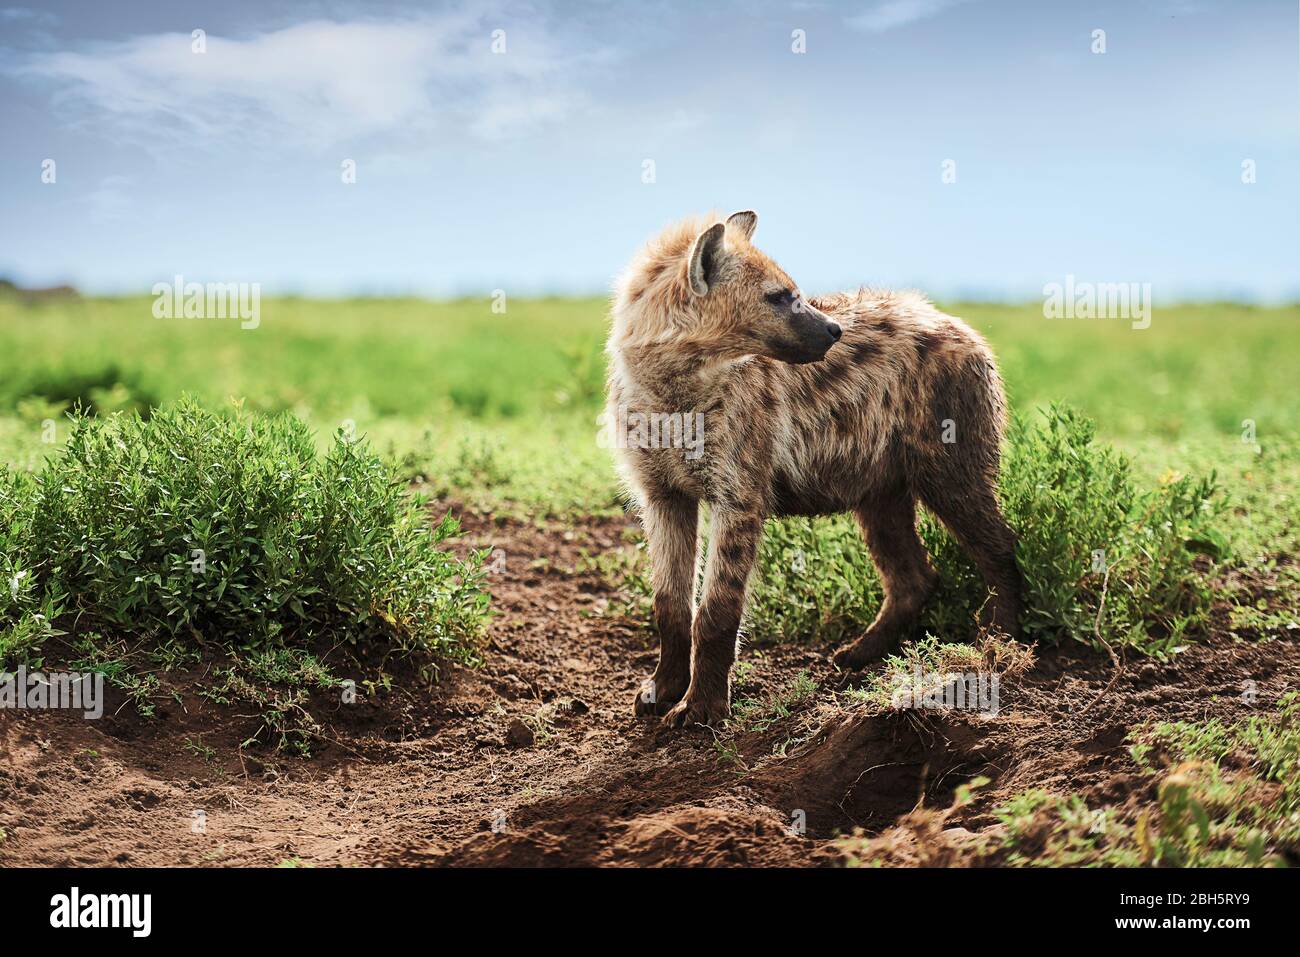 Young spotted hyena on Savannah Stock Photo